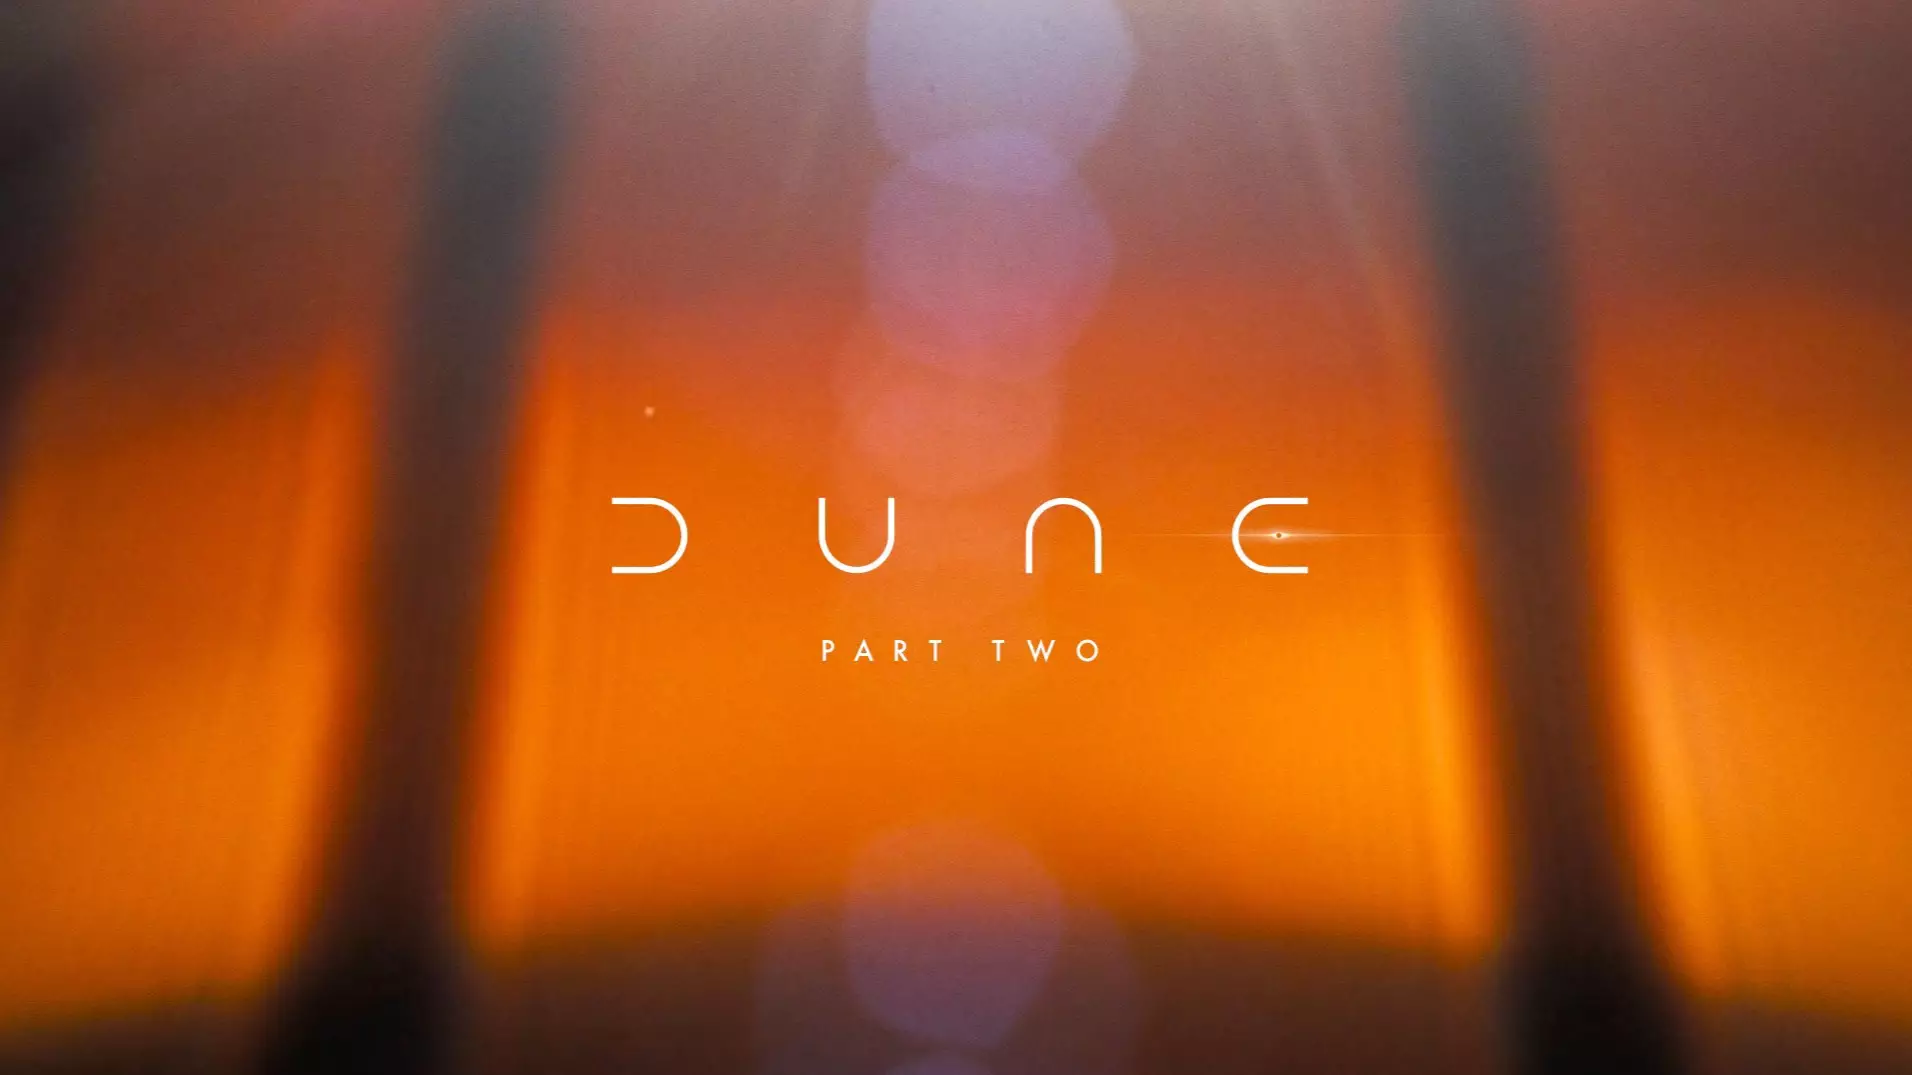 Dune: Part Two Is Officially Confirmed, So When Is It Coming Out?